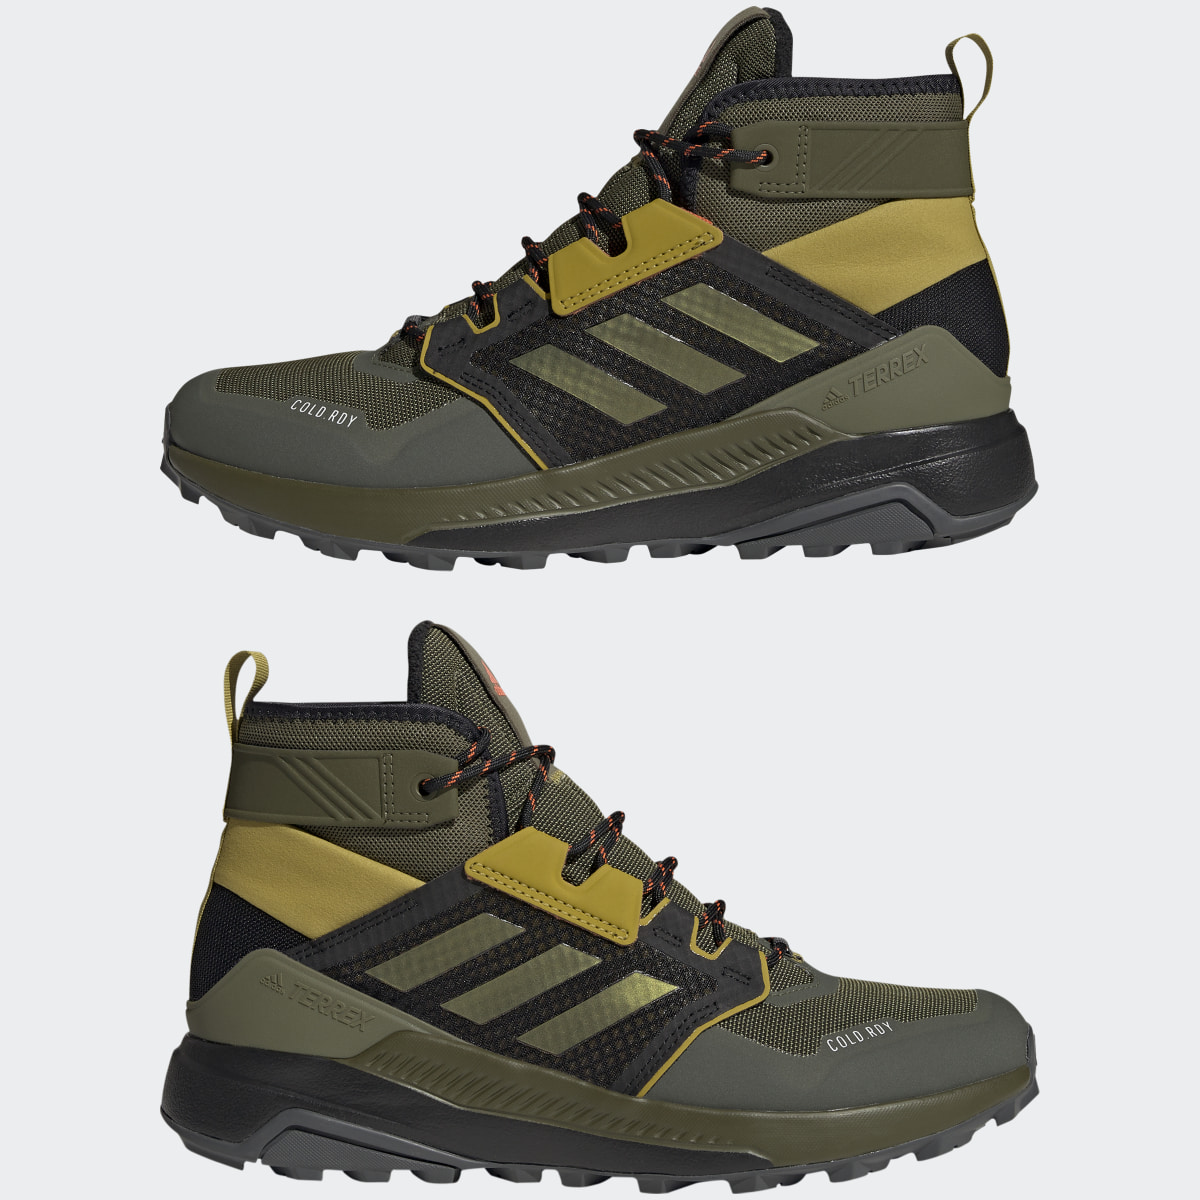 Adidas Terrex Trailmaker Mid COLD.RDY Hiking Boots. 8